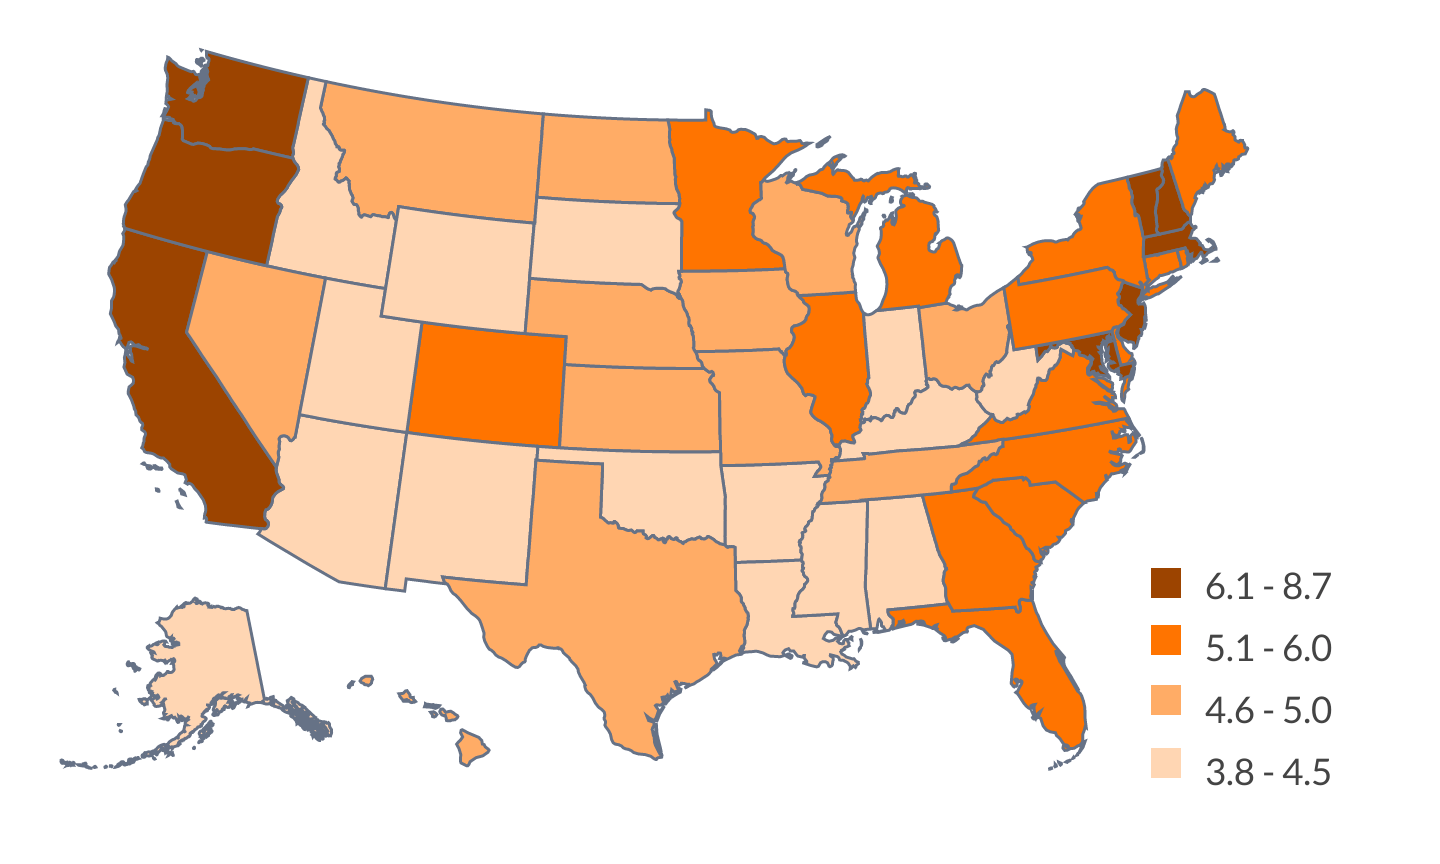 map of USA in shades of orange showing State-level Change in Mean Maternal Ages of First Births, 1970-2017